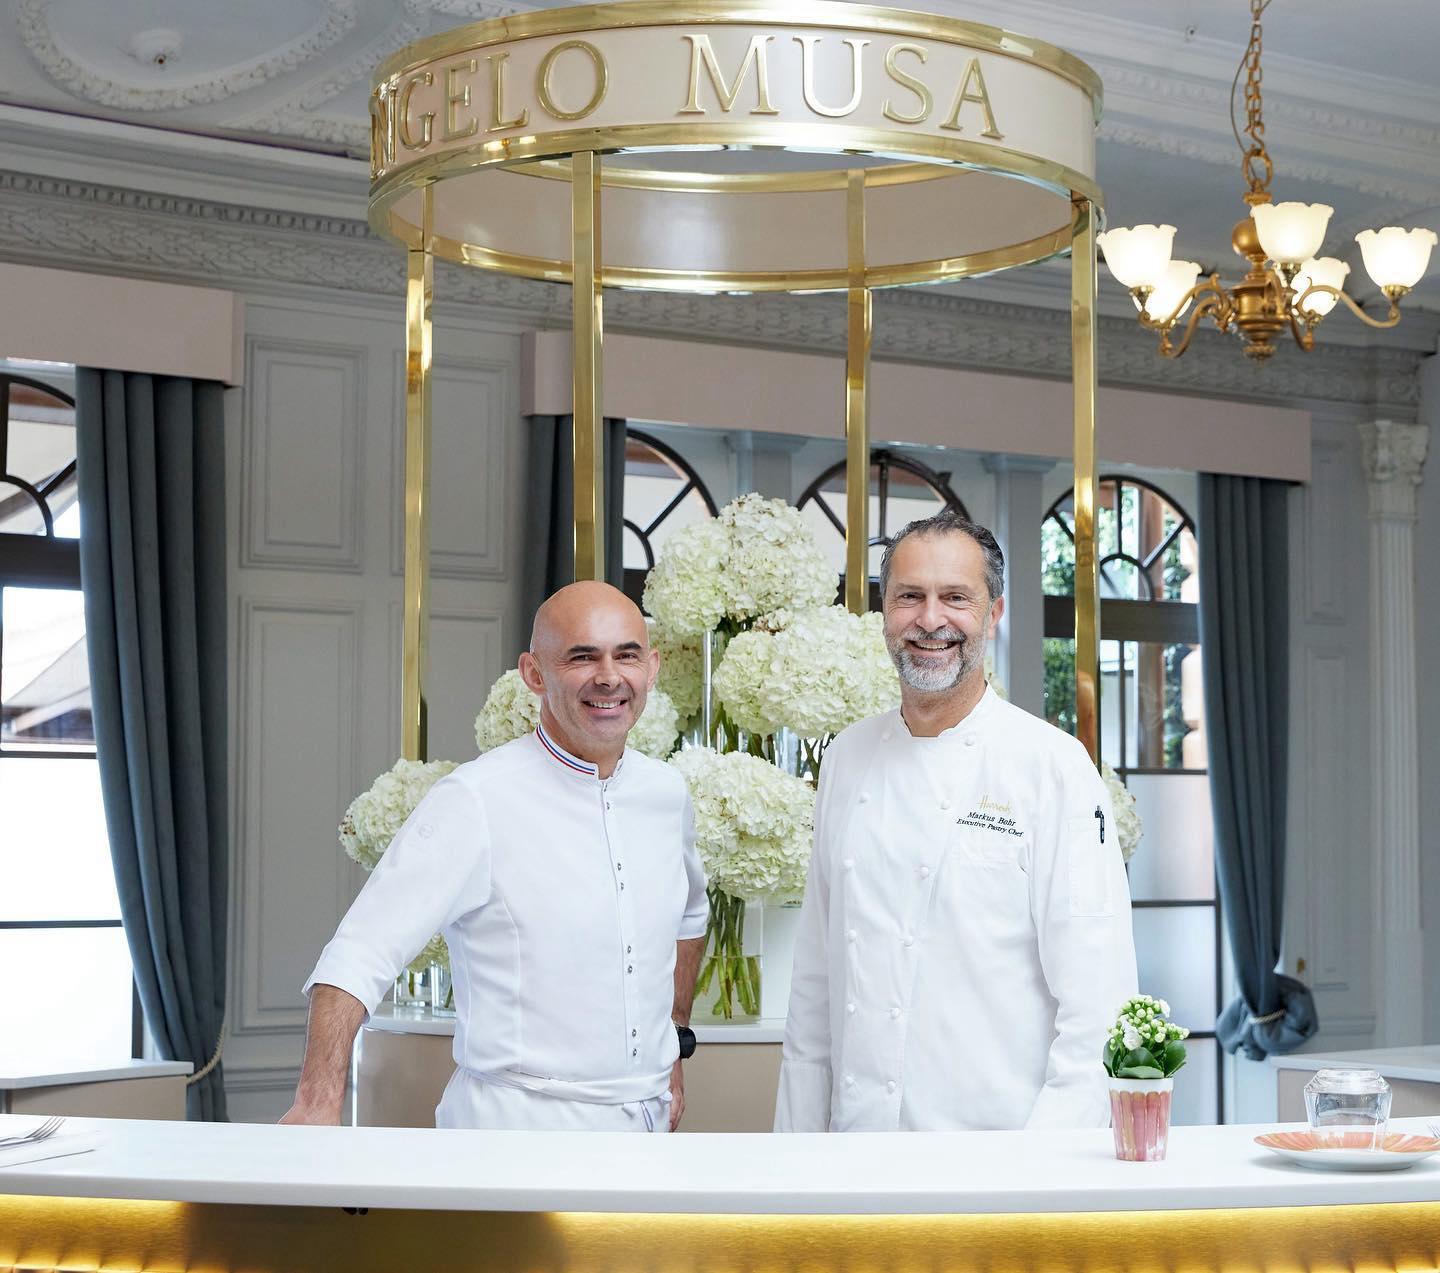 Angelo Musa - #chefmarkusbohr and I wish you all a warm welcome to my new address